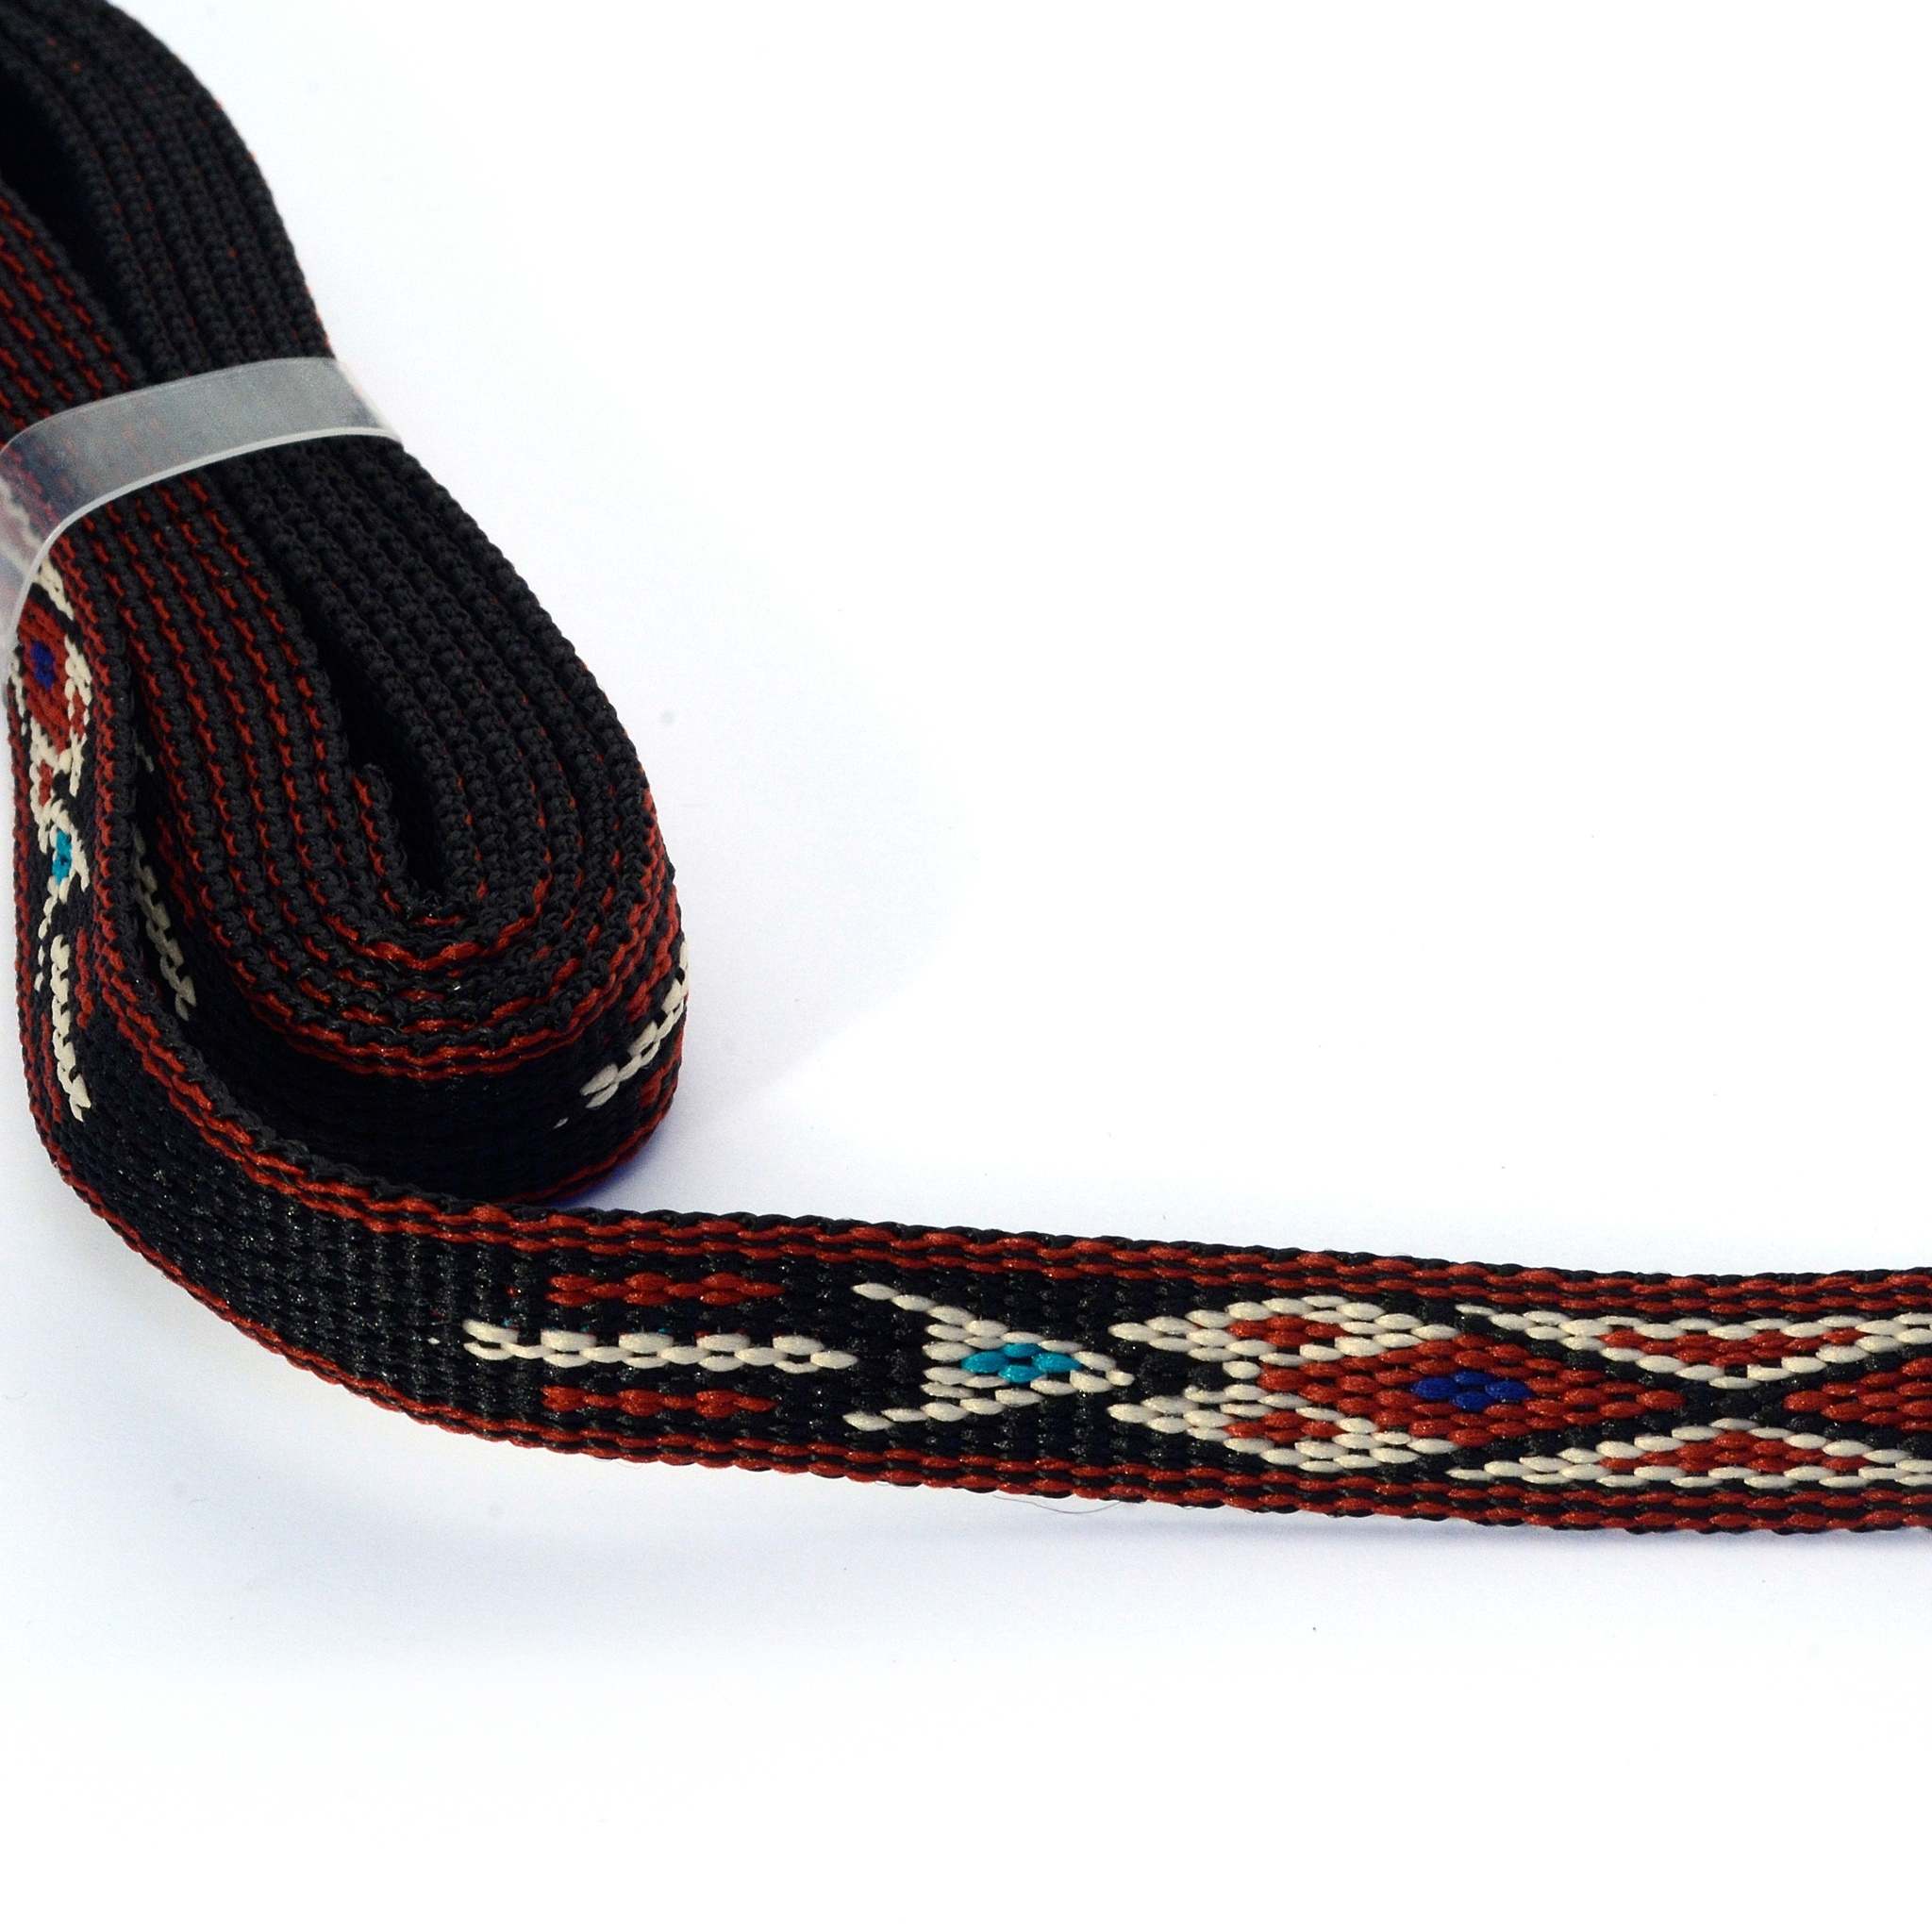 Decorative woven hitched style webbing with native american motif